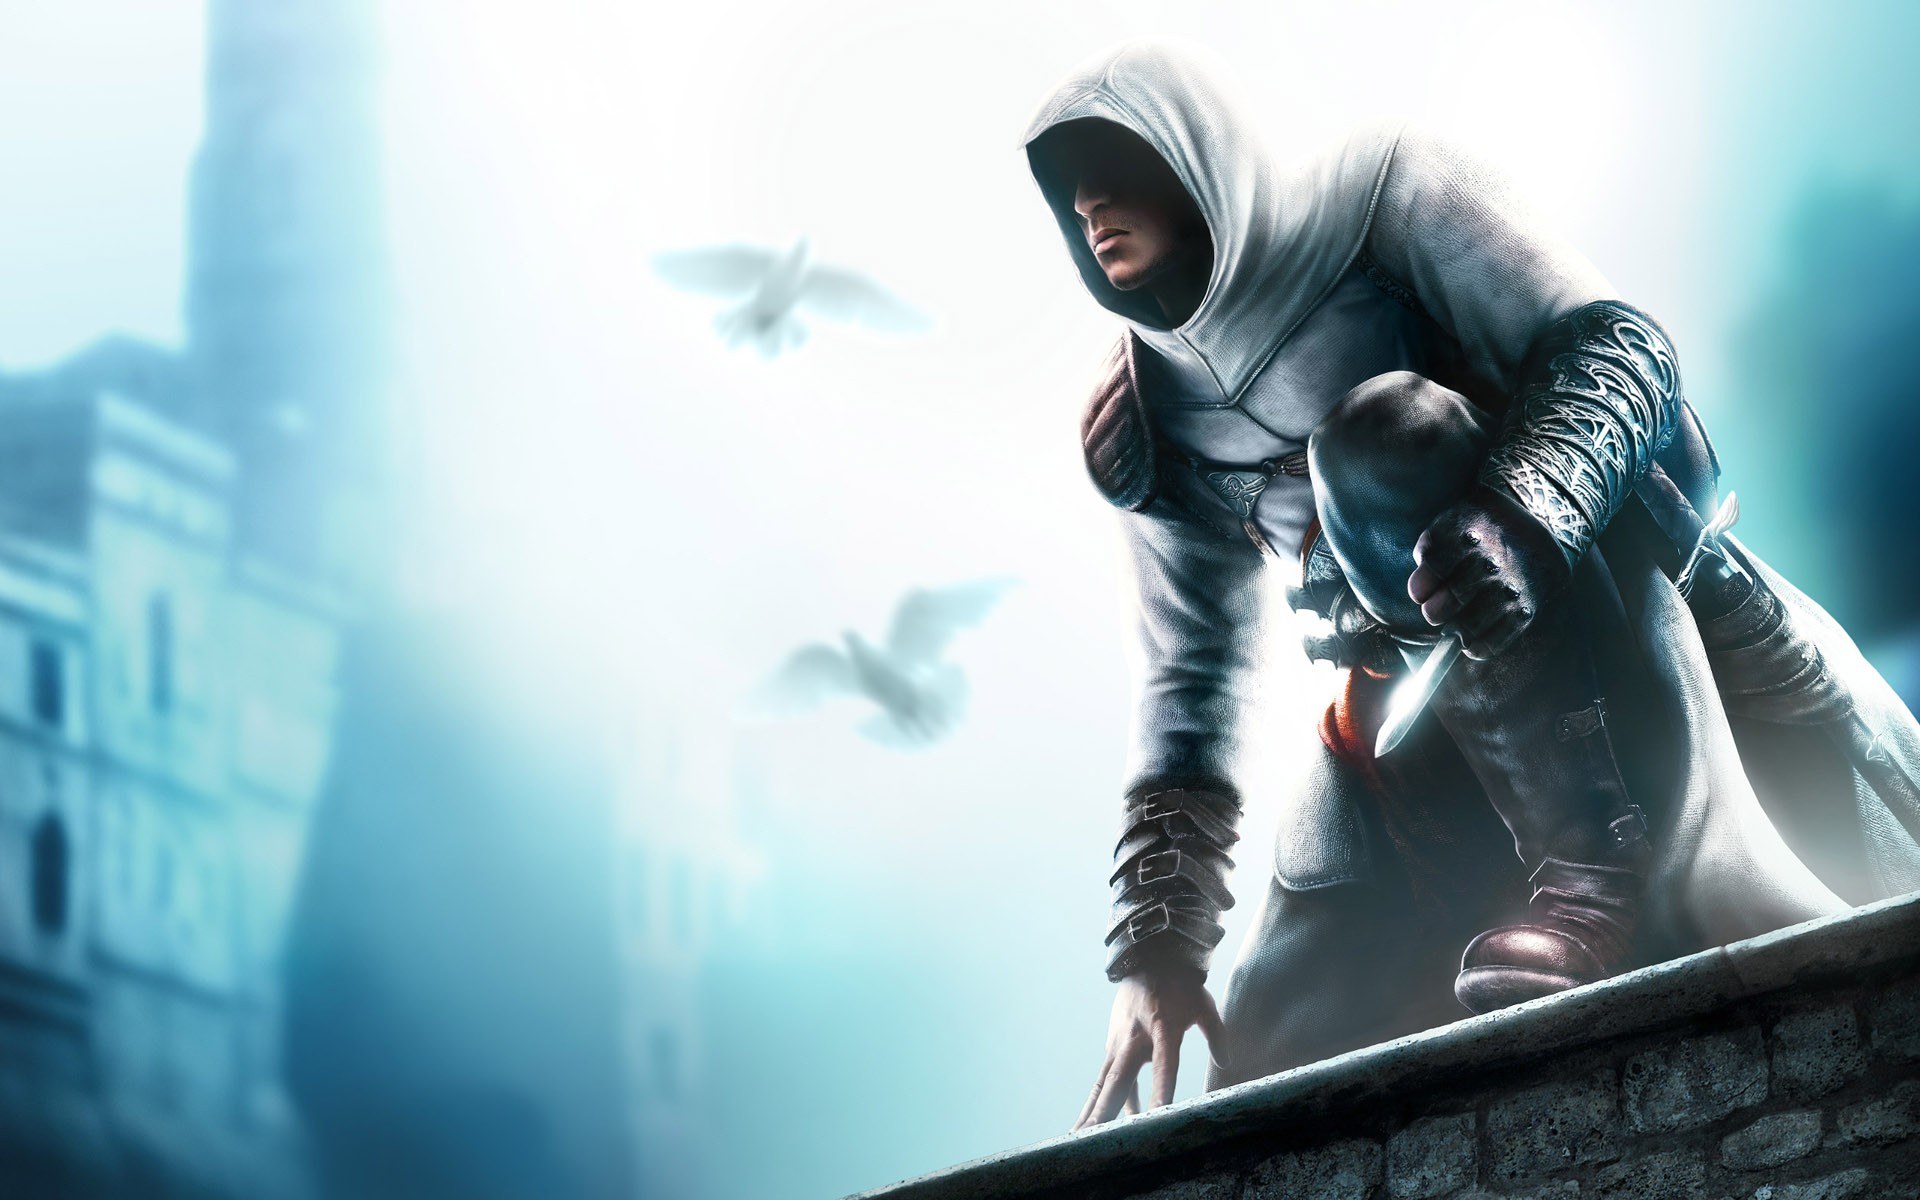 General 1920x1200 video games Assassin's Creed Altaïr Ibn-La'Ahad PC gaming video game art video game men video game characters